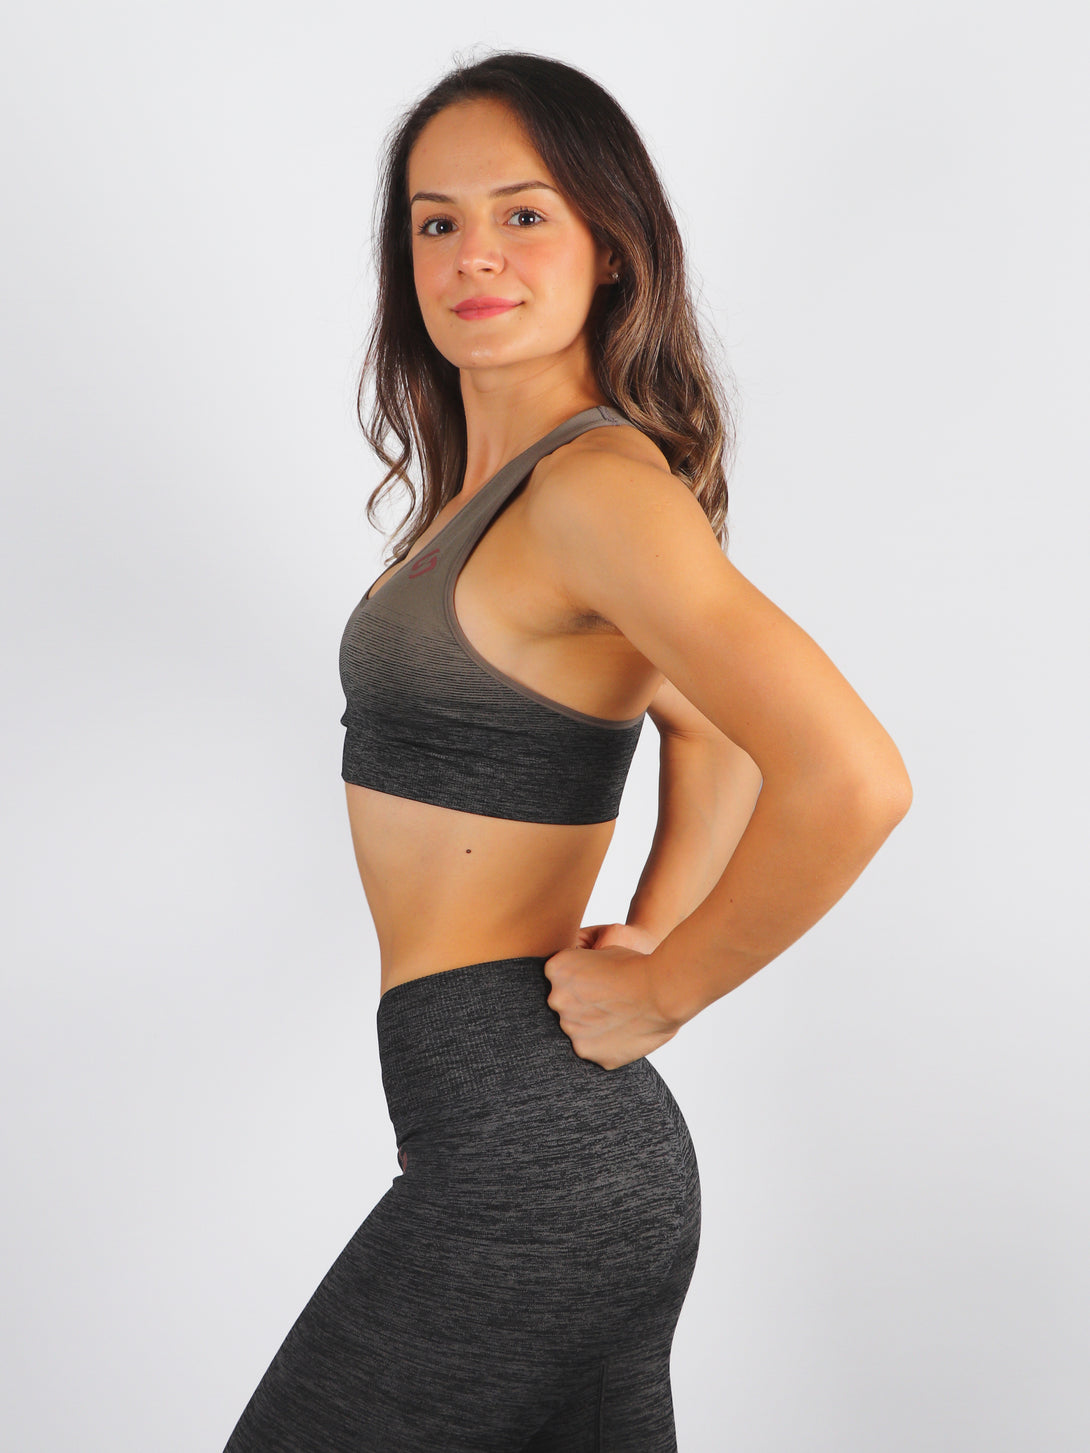 A woman wearing Khaki color Seamless Ombre Medium Support Sports Bra